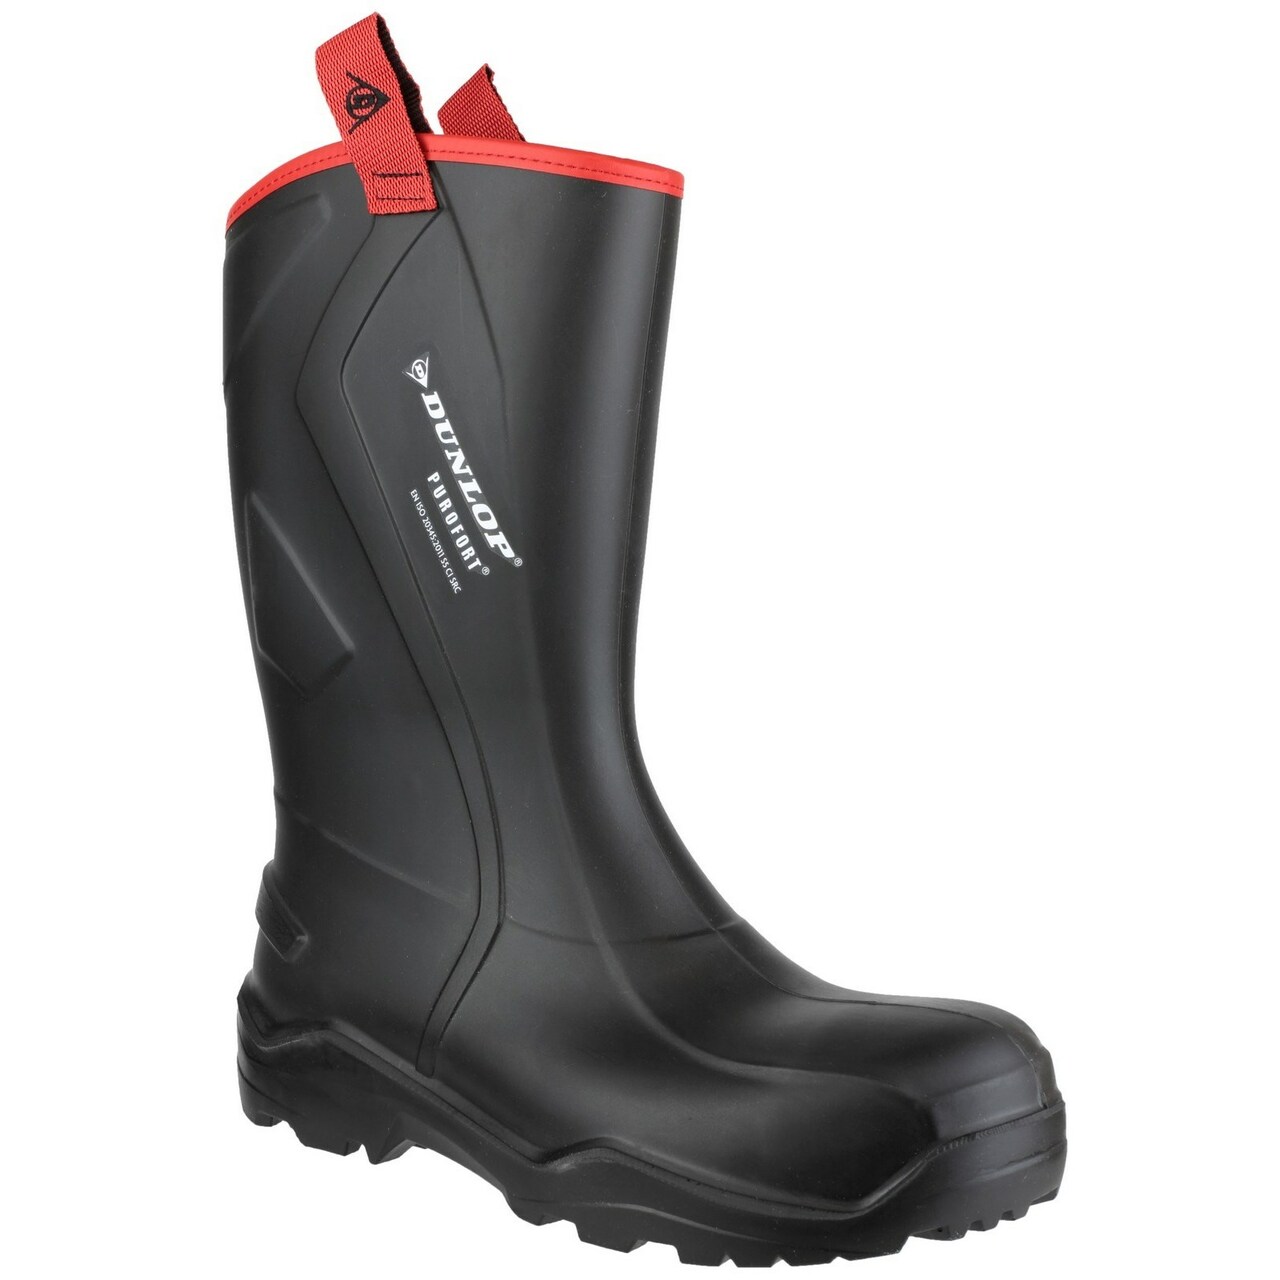 Purofort+ Rugged Full Safety Wellingtons